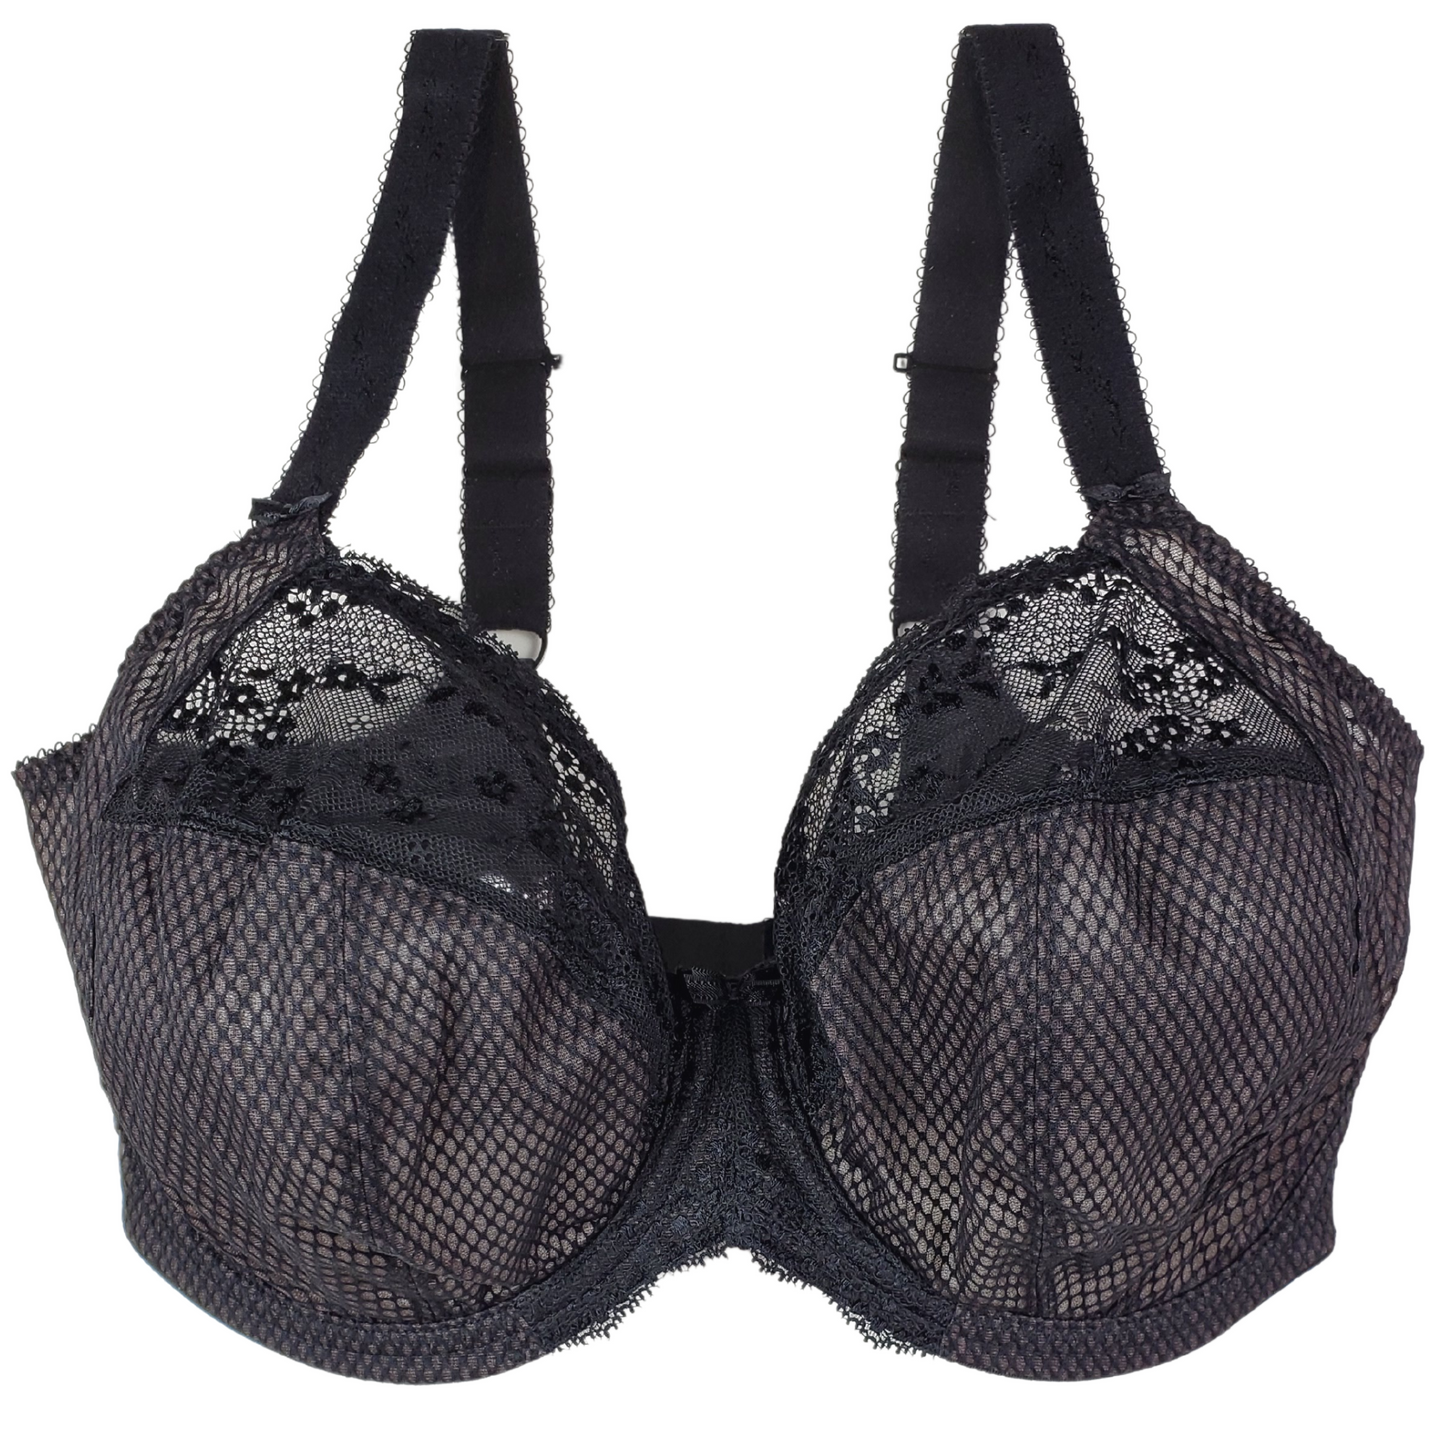 Elomi Charley Side Support Plunge Bra